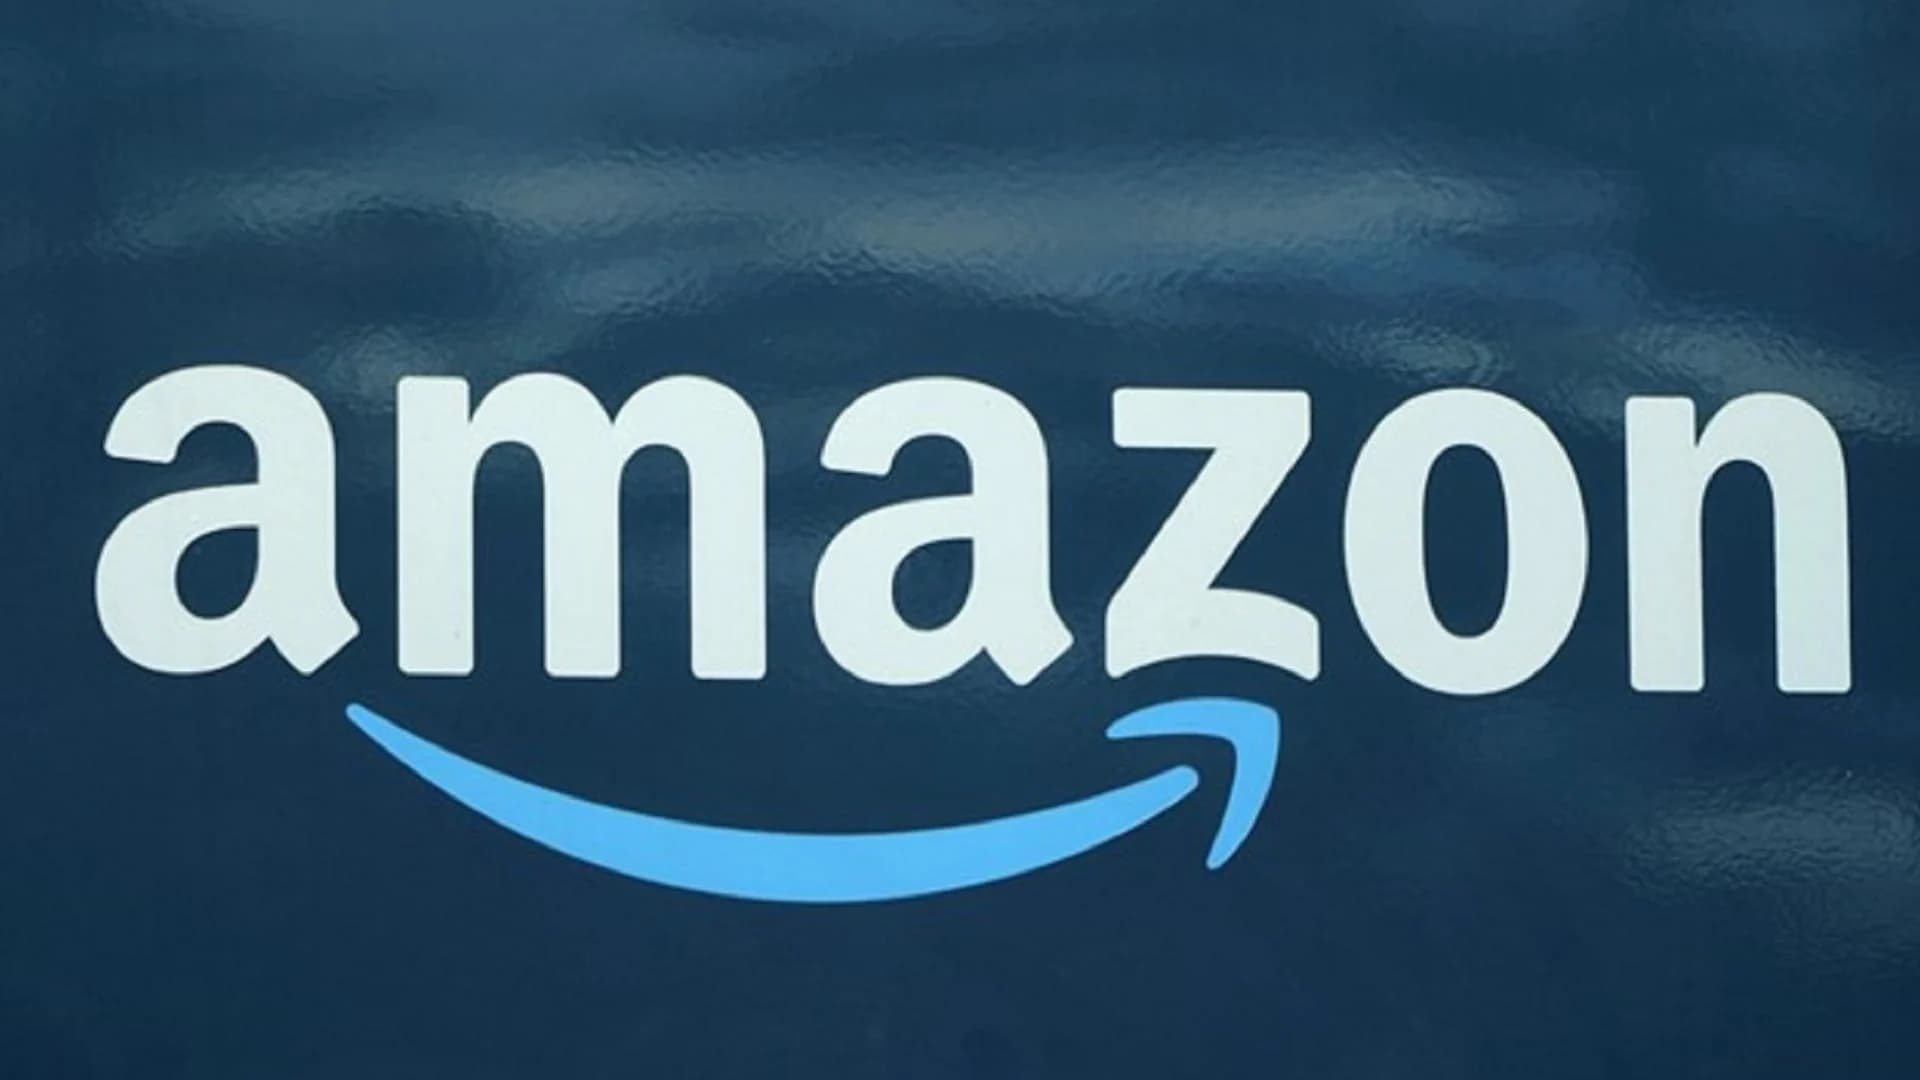 Major outage hits Amazon Web Services; many sites affected